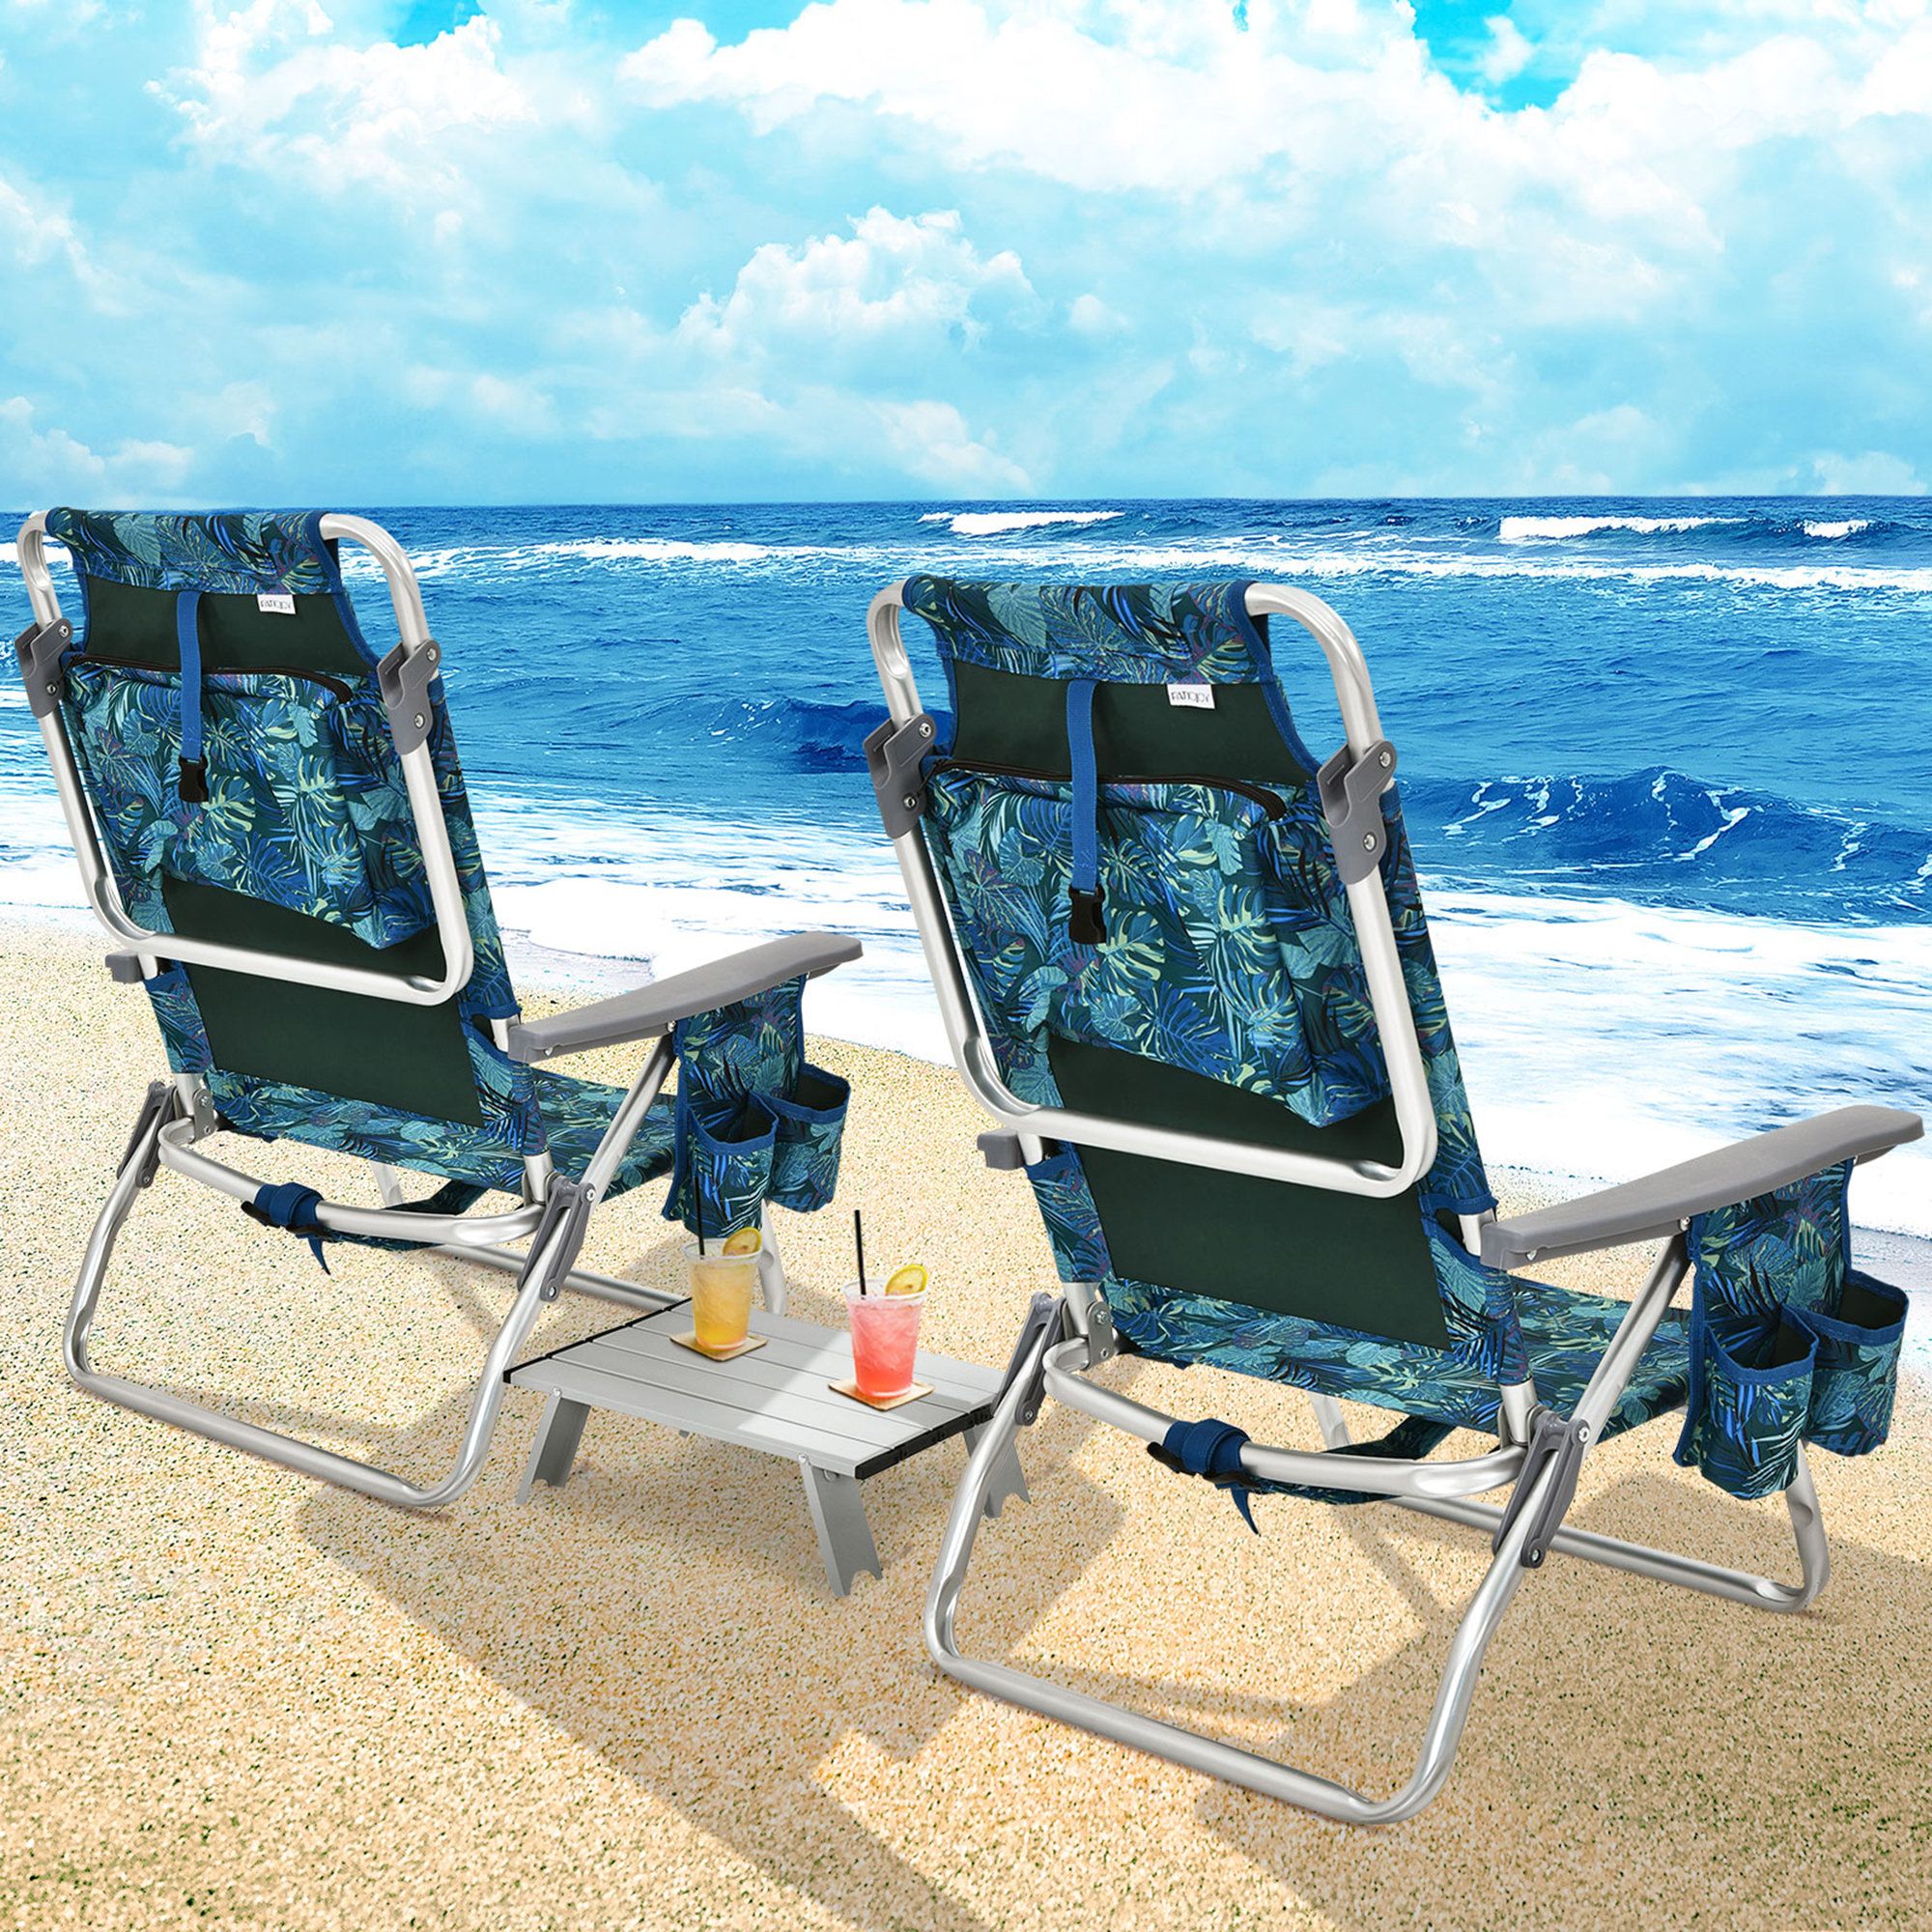 Gymax 3PCS Folding Beach Chair & Table Set Adjustable Outdoor Reclining Chair - image 4 of 10